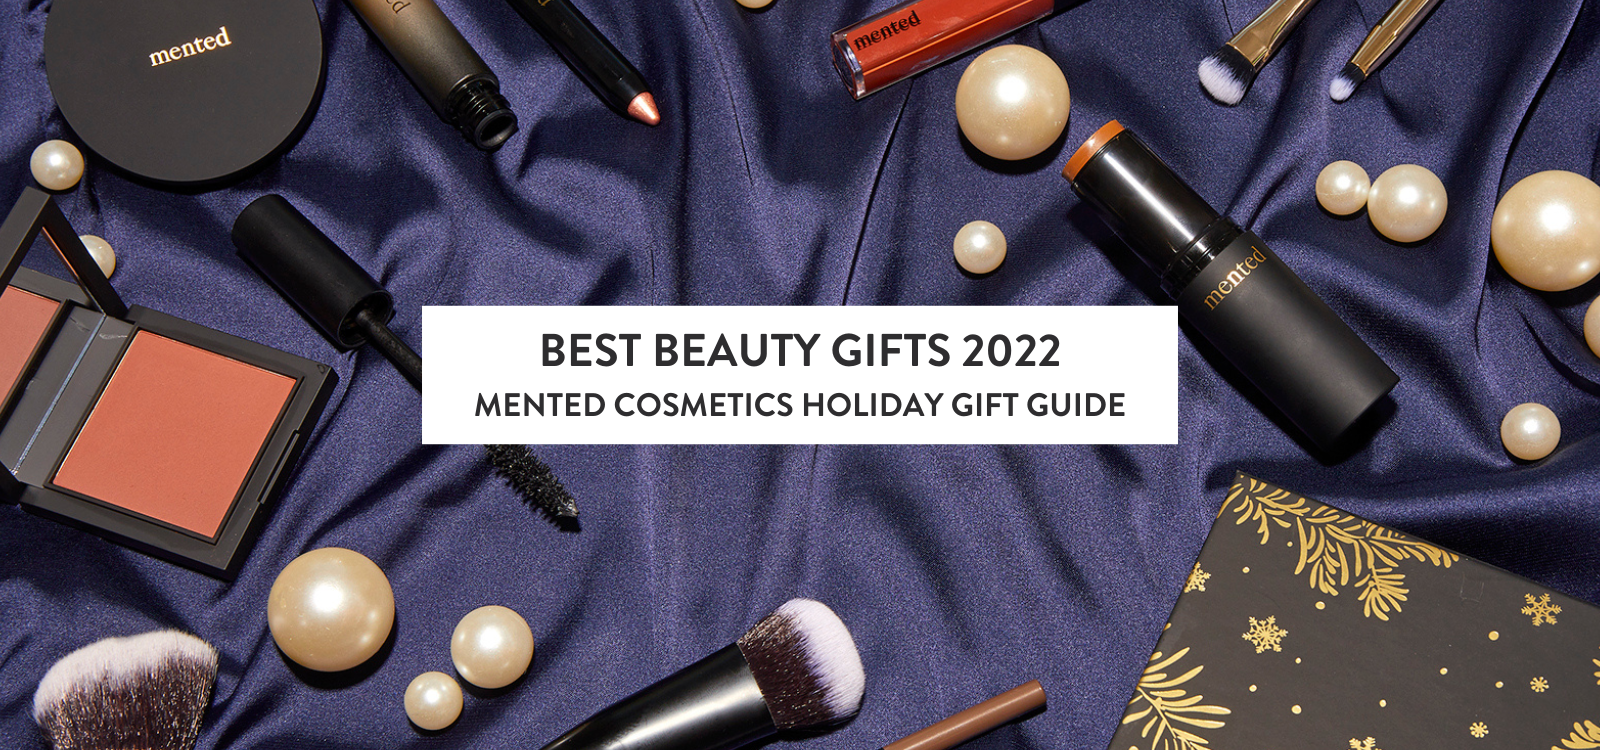 Best Beauty Gifts 2022: Mented Cosmetics Holiday Gift Guide